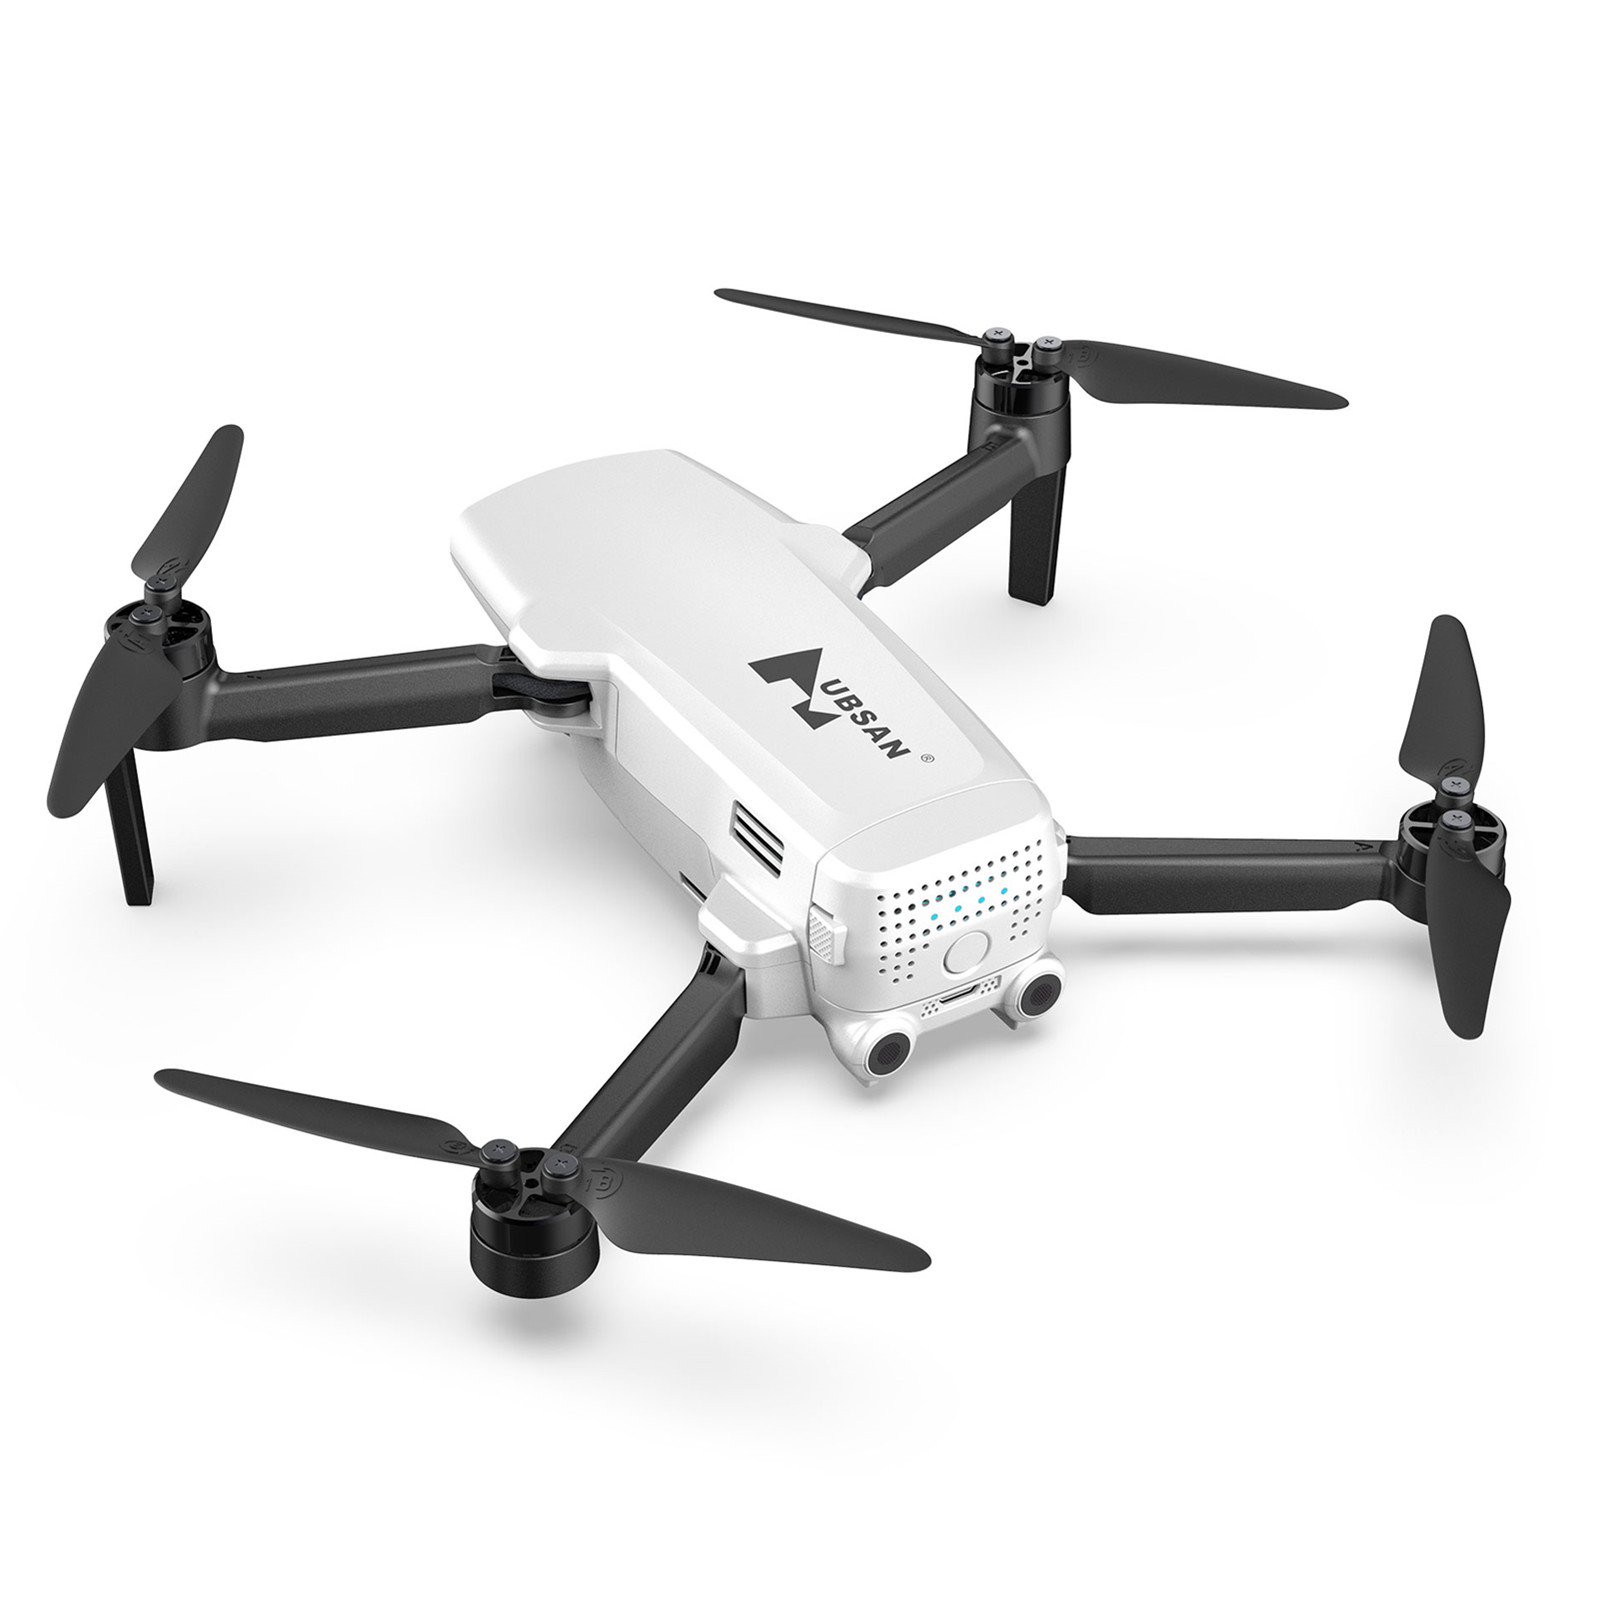 Find Hubsan MINI GPS 6KM FPV with 1/1 3 CMOS 4K 30fps Camera 3 axis Gimbal 45mins Flight Time AI Tracking RC Drone Quadcopter RTF for Sale on Gipsybee.com with cryptocurrencies